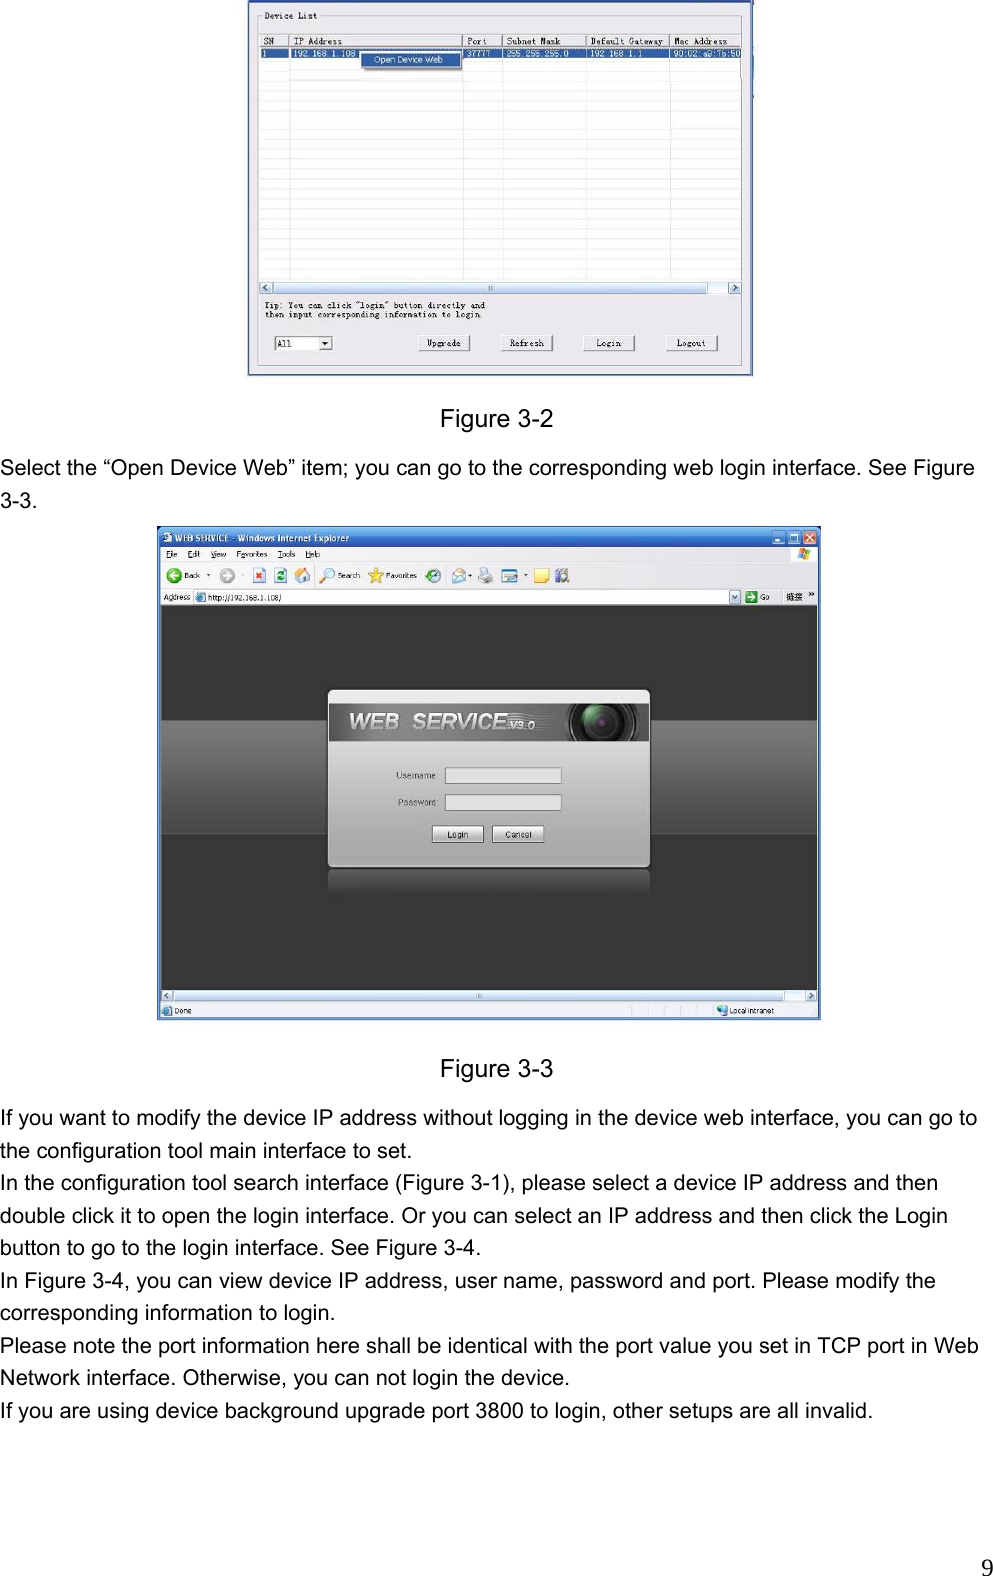                                                                              9 Figure 3-2 Select the “Open Device Web” item; you can go to the corresponding web login interface. See Figure 3-3.  Figure 3-3 If you want to modify the device IP address without logging in the device web interface, you can go to the configuration tool main interface to set.  In the configuration tool search interface (Figure 3-1), please select a device IP address and then double click it to open the login interface. Or you can select an IP address and then click the Login button to go to the login interface. See Figure 3-4. In Figure 3-4, you can view device IP address, user name, password and port. Please modify the corresponding information to login.  Please note the port information here shall be identical with the port value you set in TCP port in Web Network interface. Otherwise, you can not login the device.  If you are using device background upgrade port 3800 to login, other setups are all invalid. 